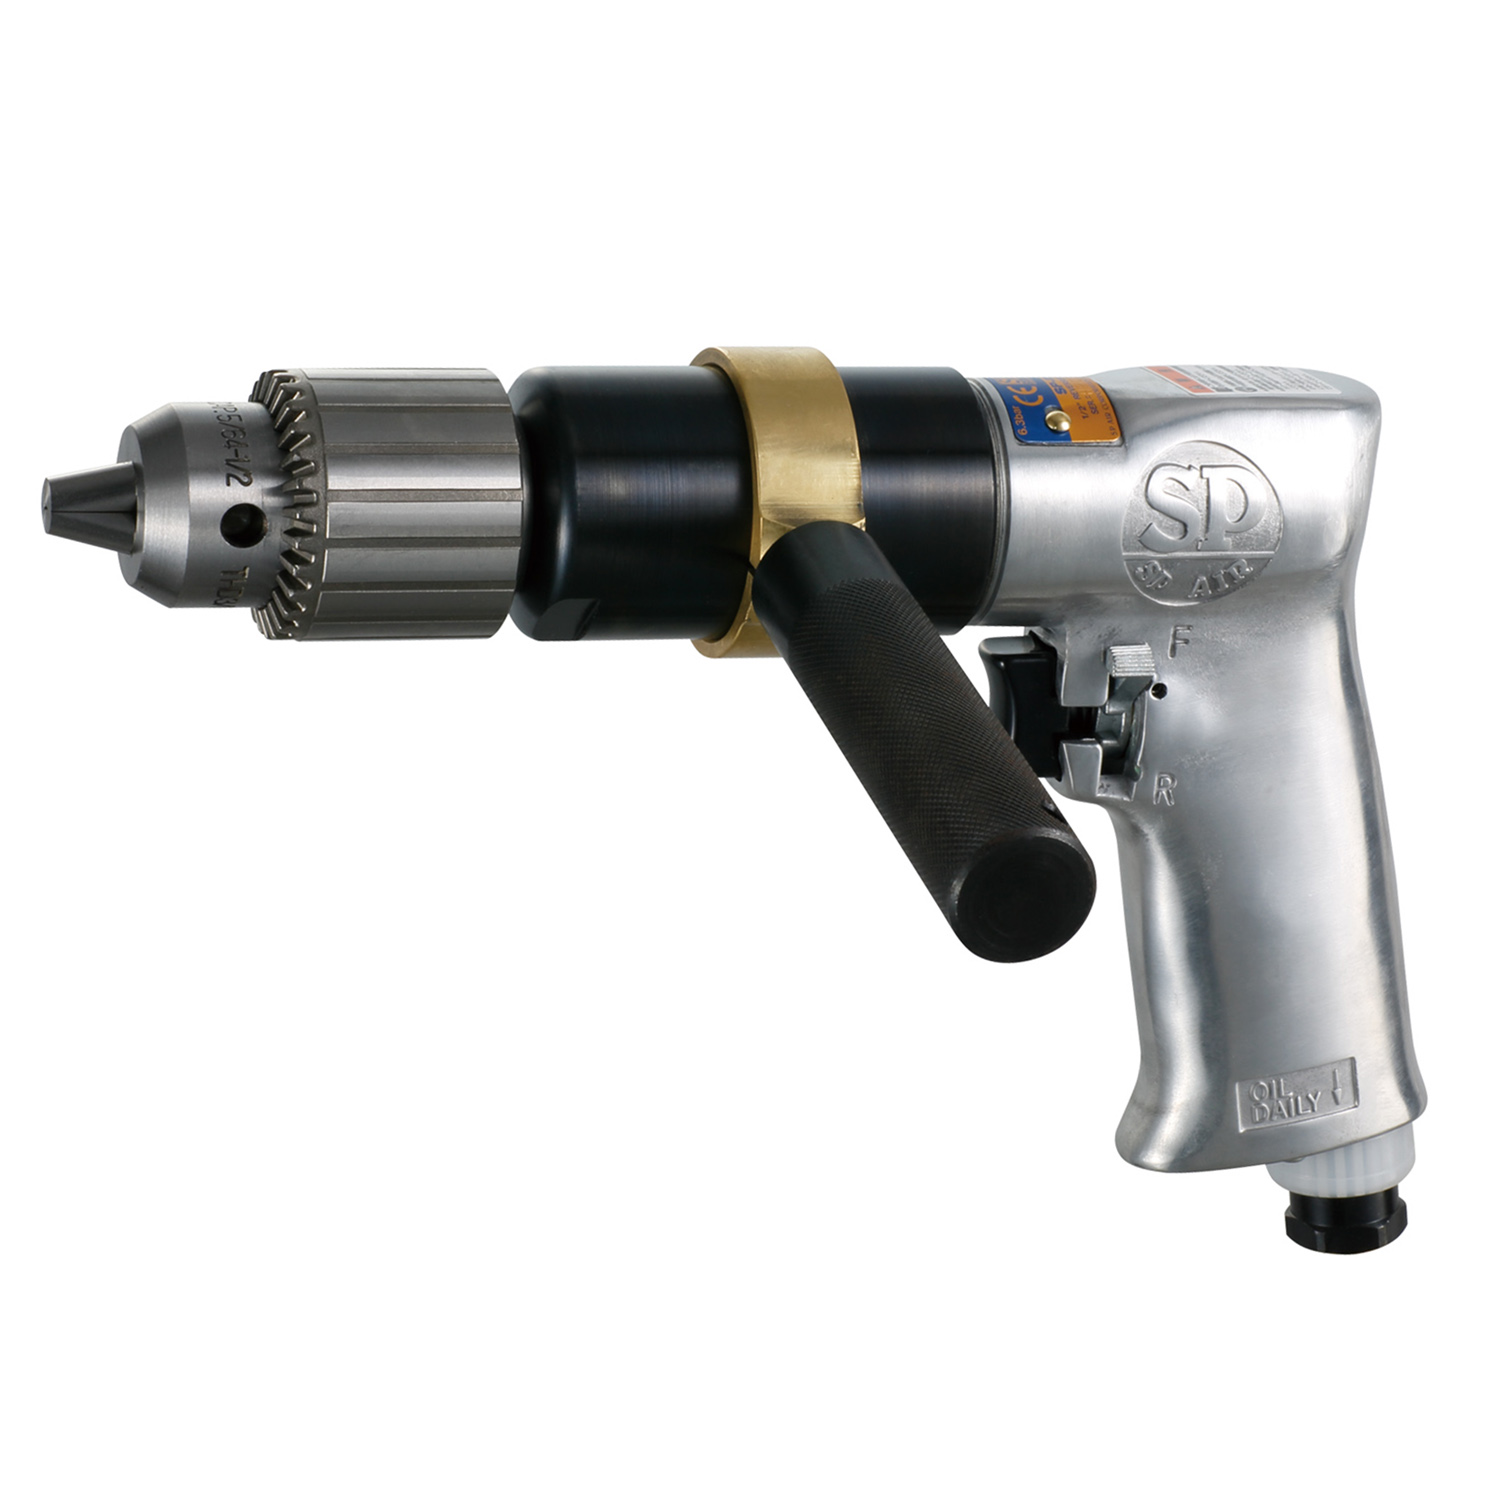 REVERSIBLE DRILL No.SP-1527 | PRODCTS | SP AIR AIR TOOLS | VESSEL CO., INC